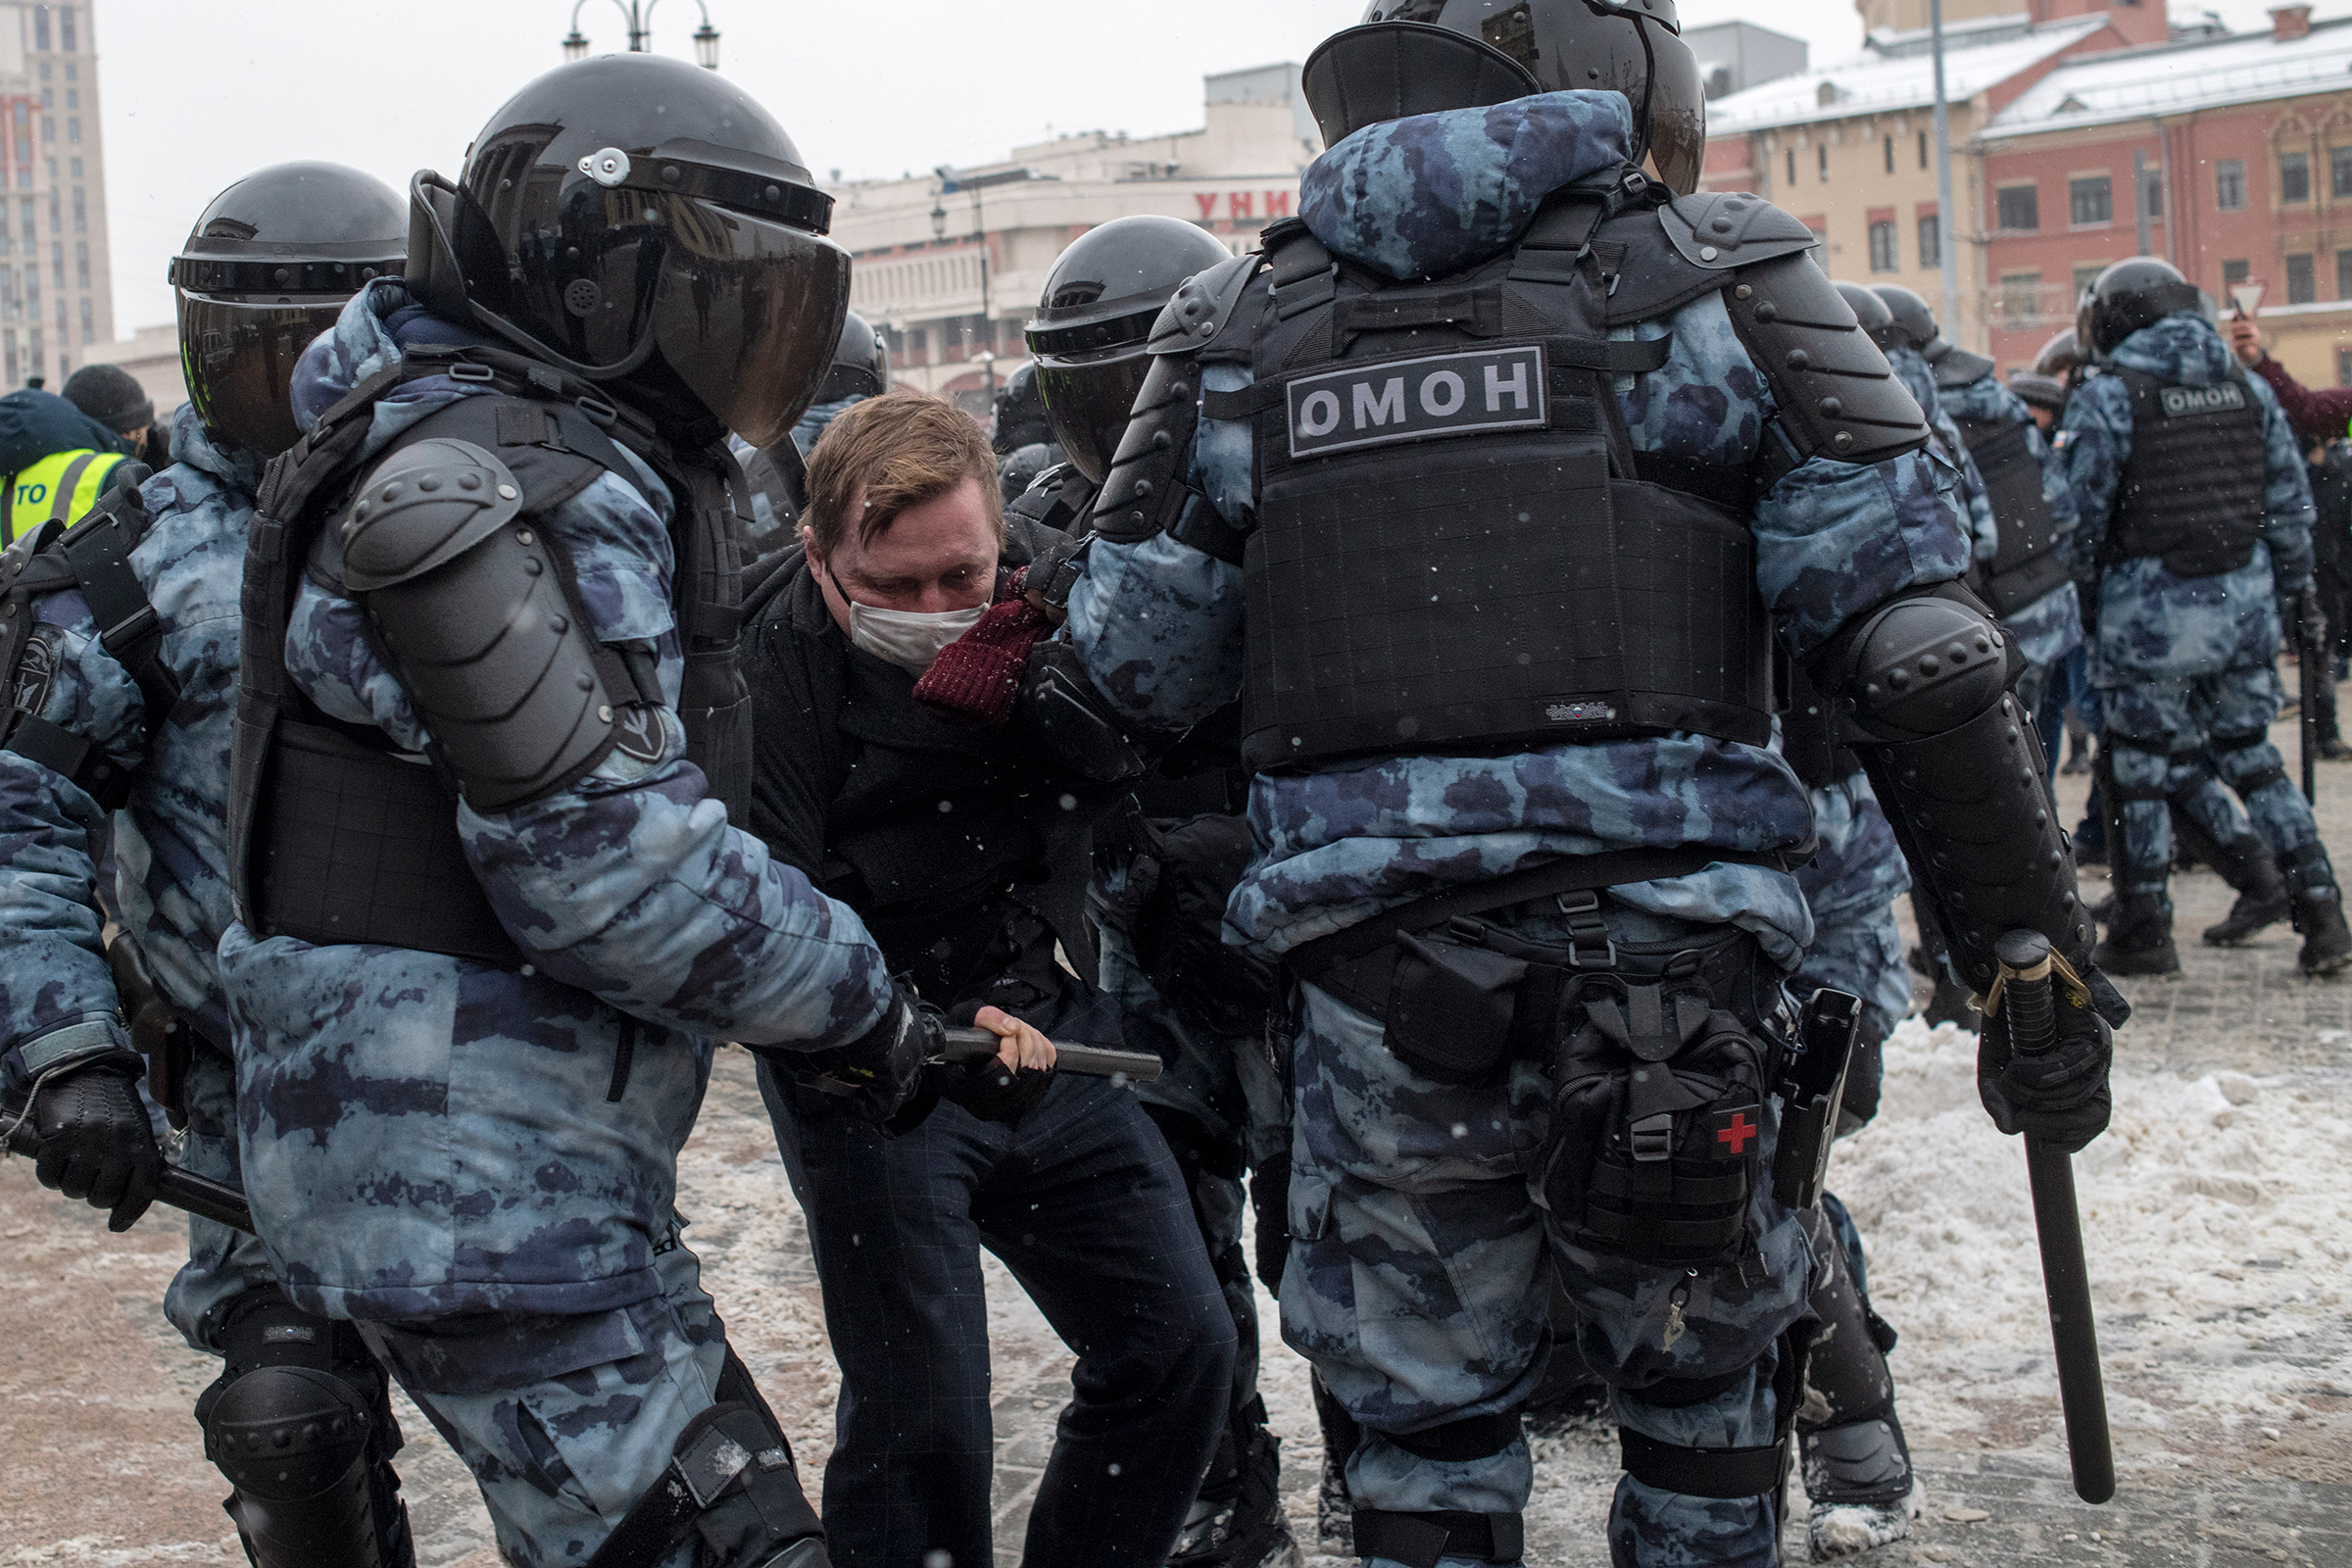 Some 5,100 people were reportedly detained across Russia on Jan. 31, including more than 1,600 in Moscow, shown here.